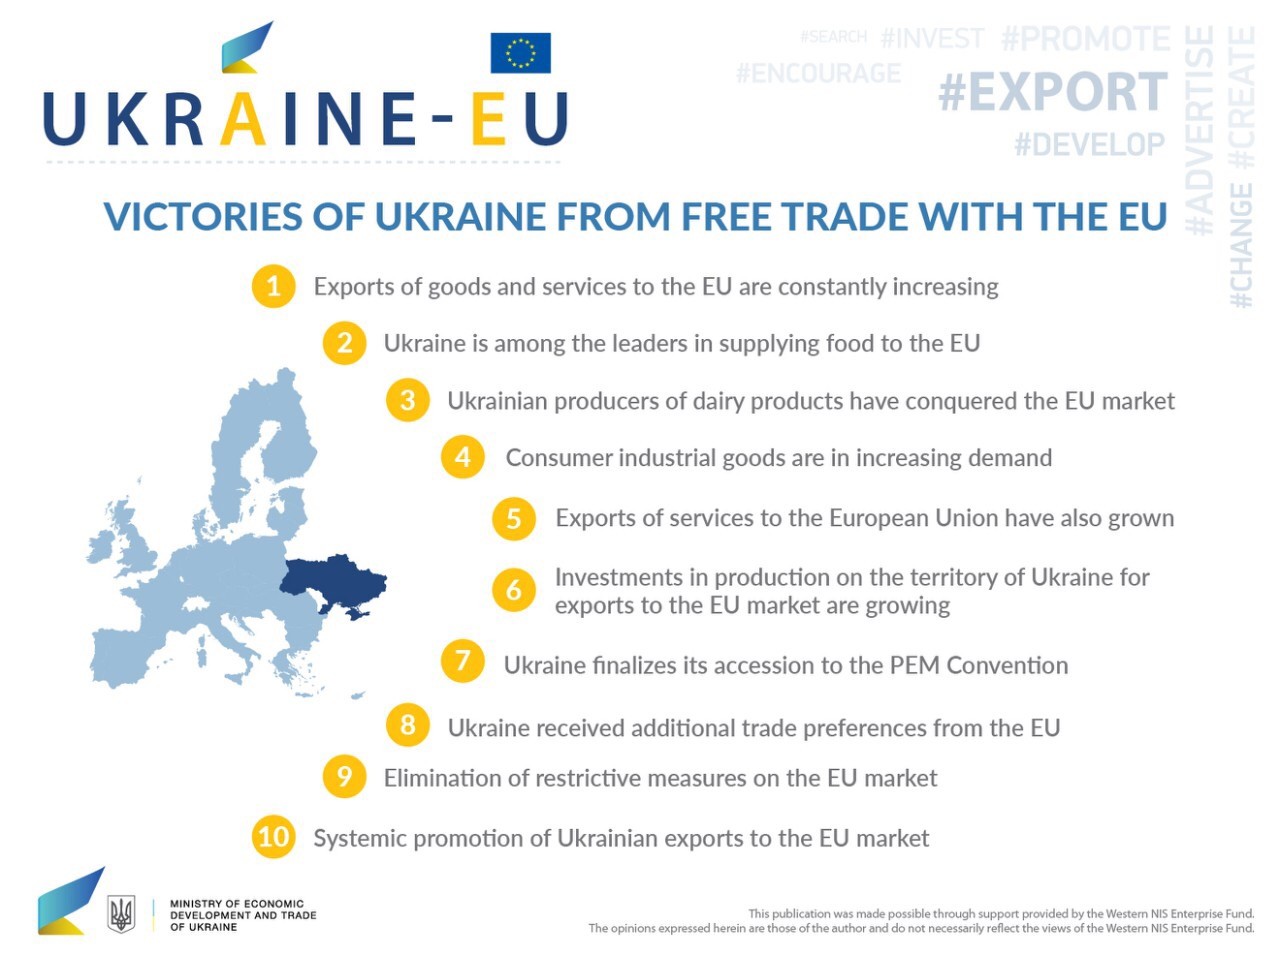 Victories of Ukraine from free trade with the EU.